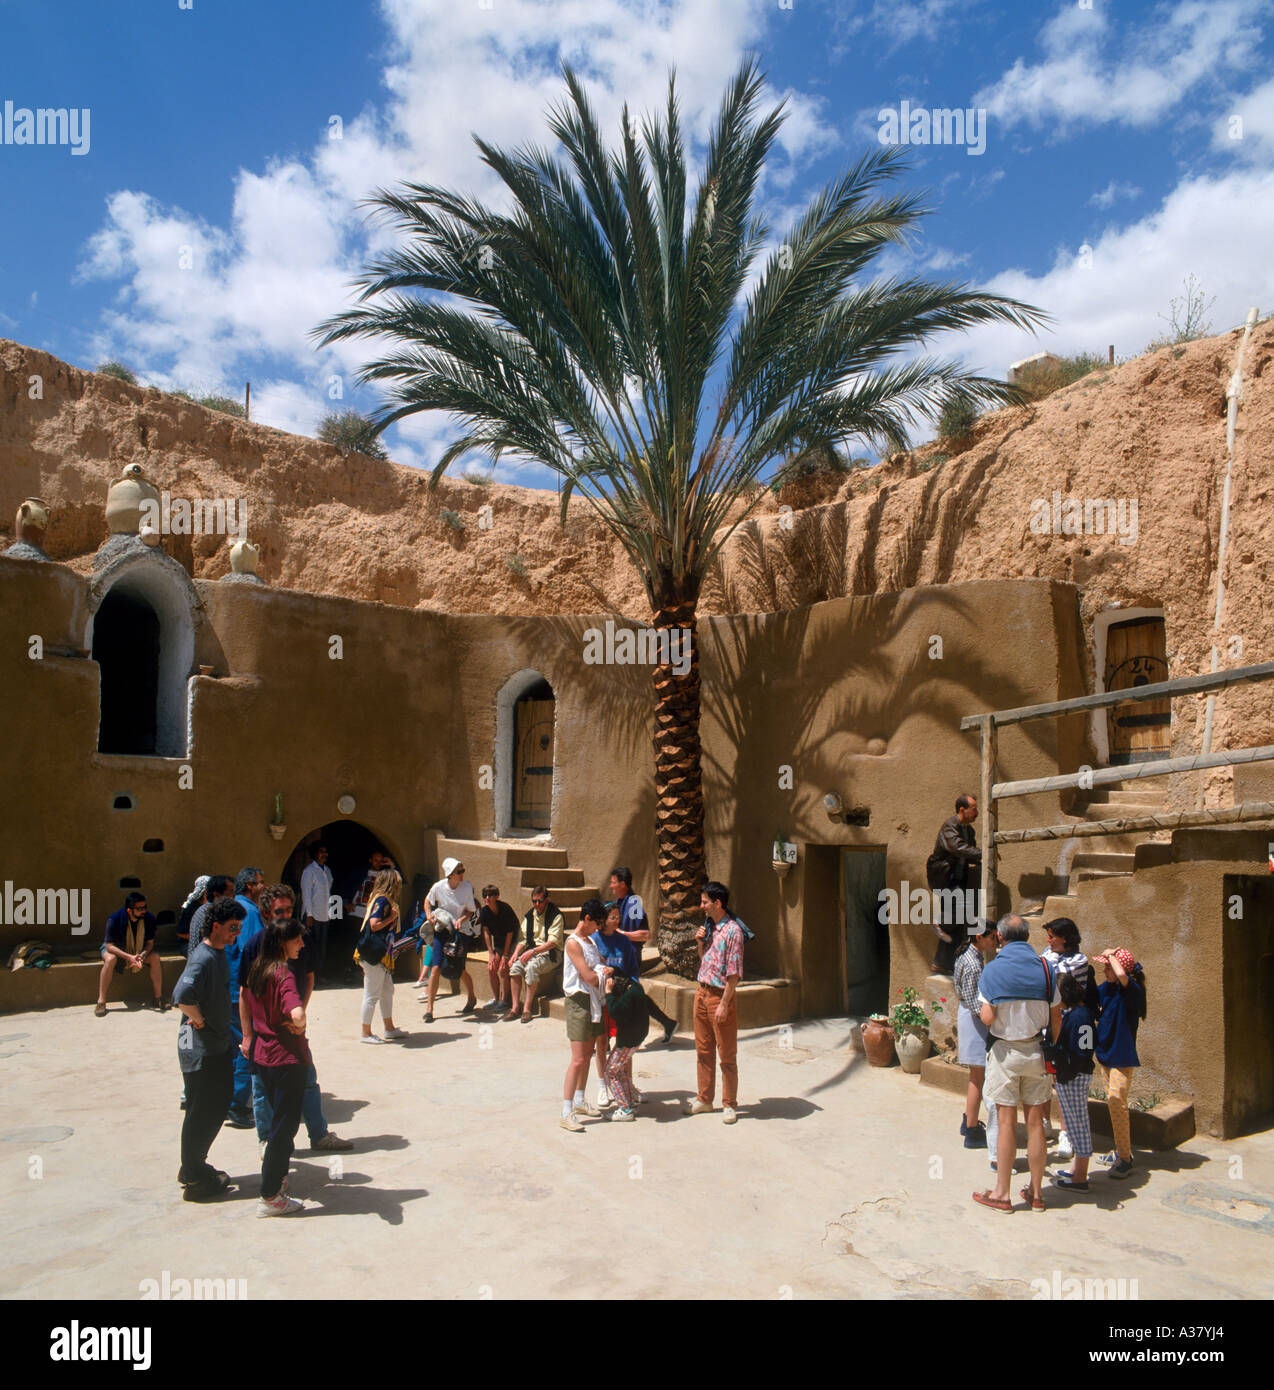 Underground Hotel at Matmata (location for the filming of Star Wars), Tunisia, North Africa Stock Photo